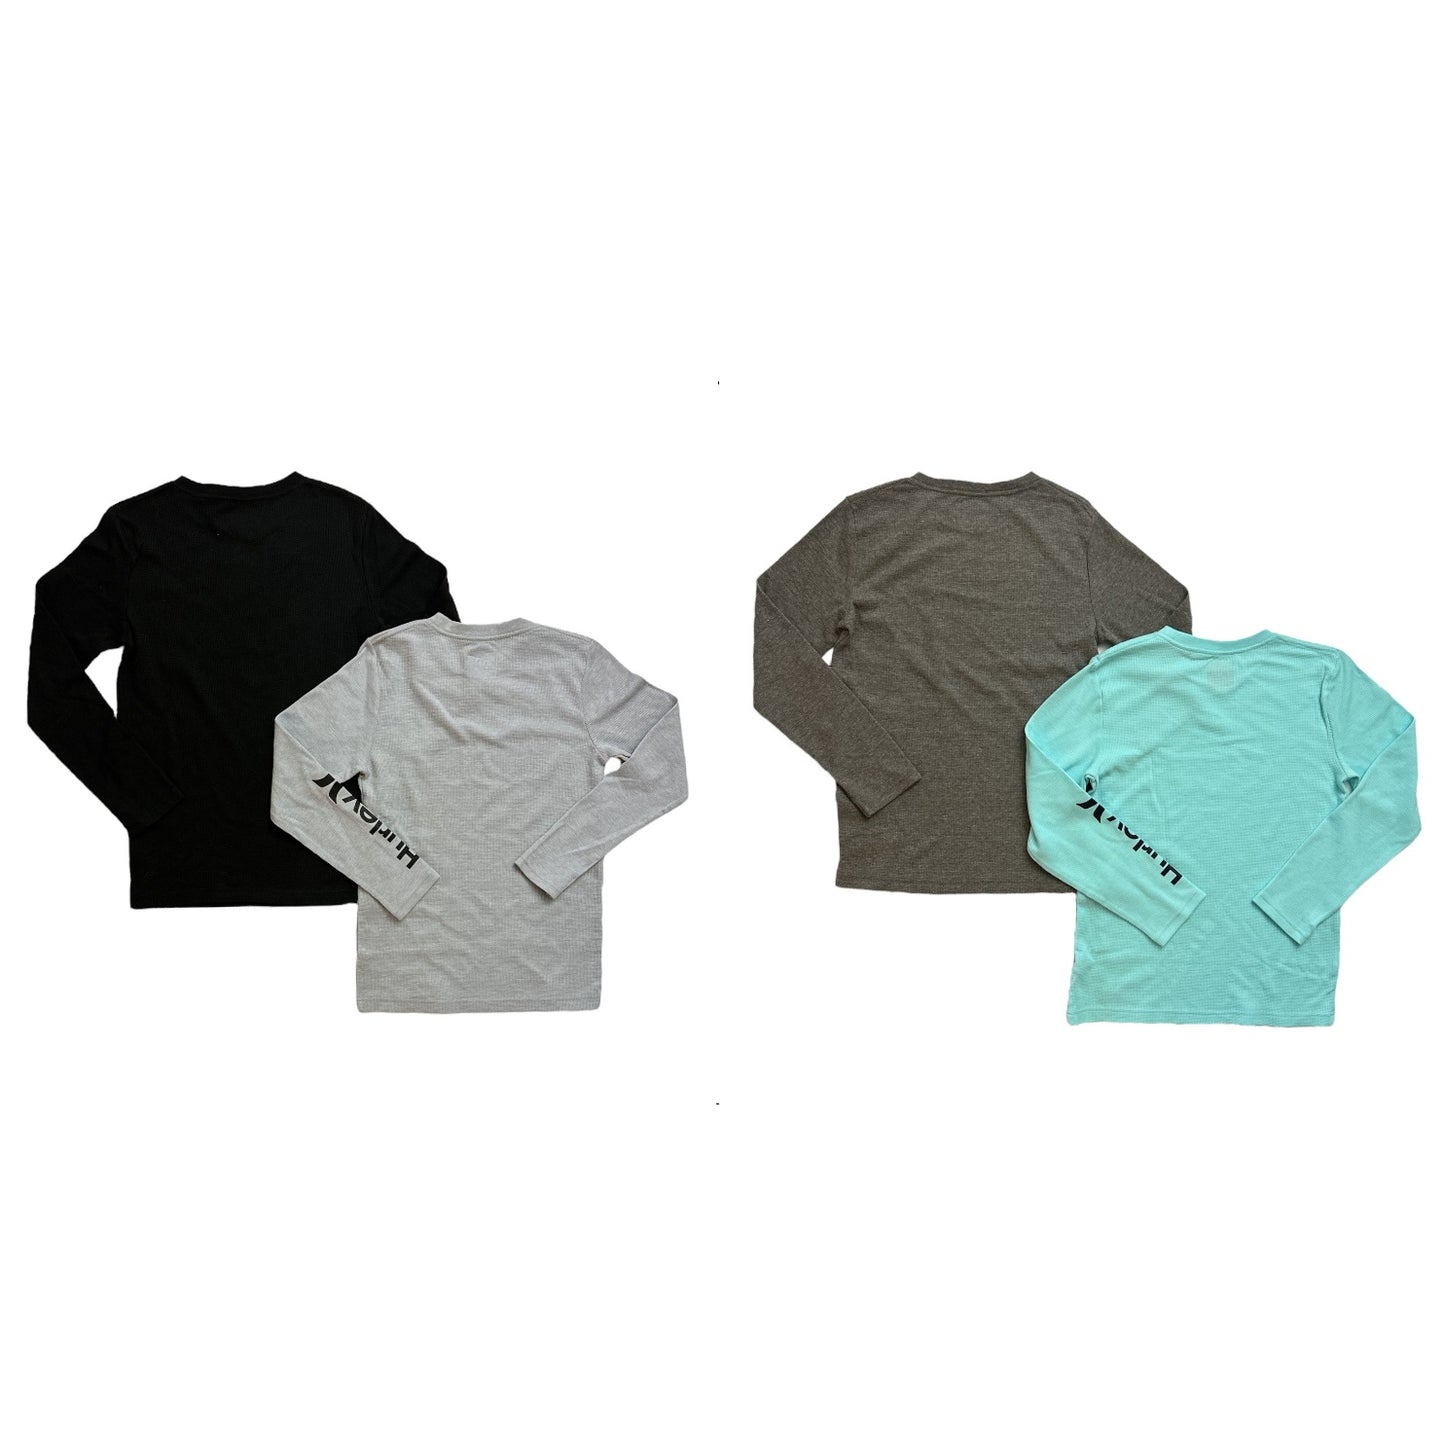 Hurley Boy's 2-Pack Thermal Crew Neck Long Sleeve T-Shirts